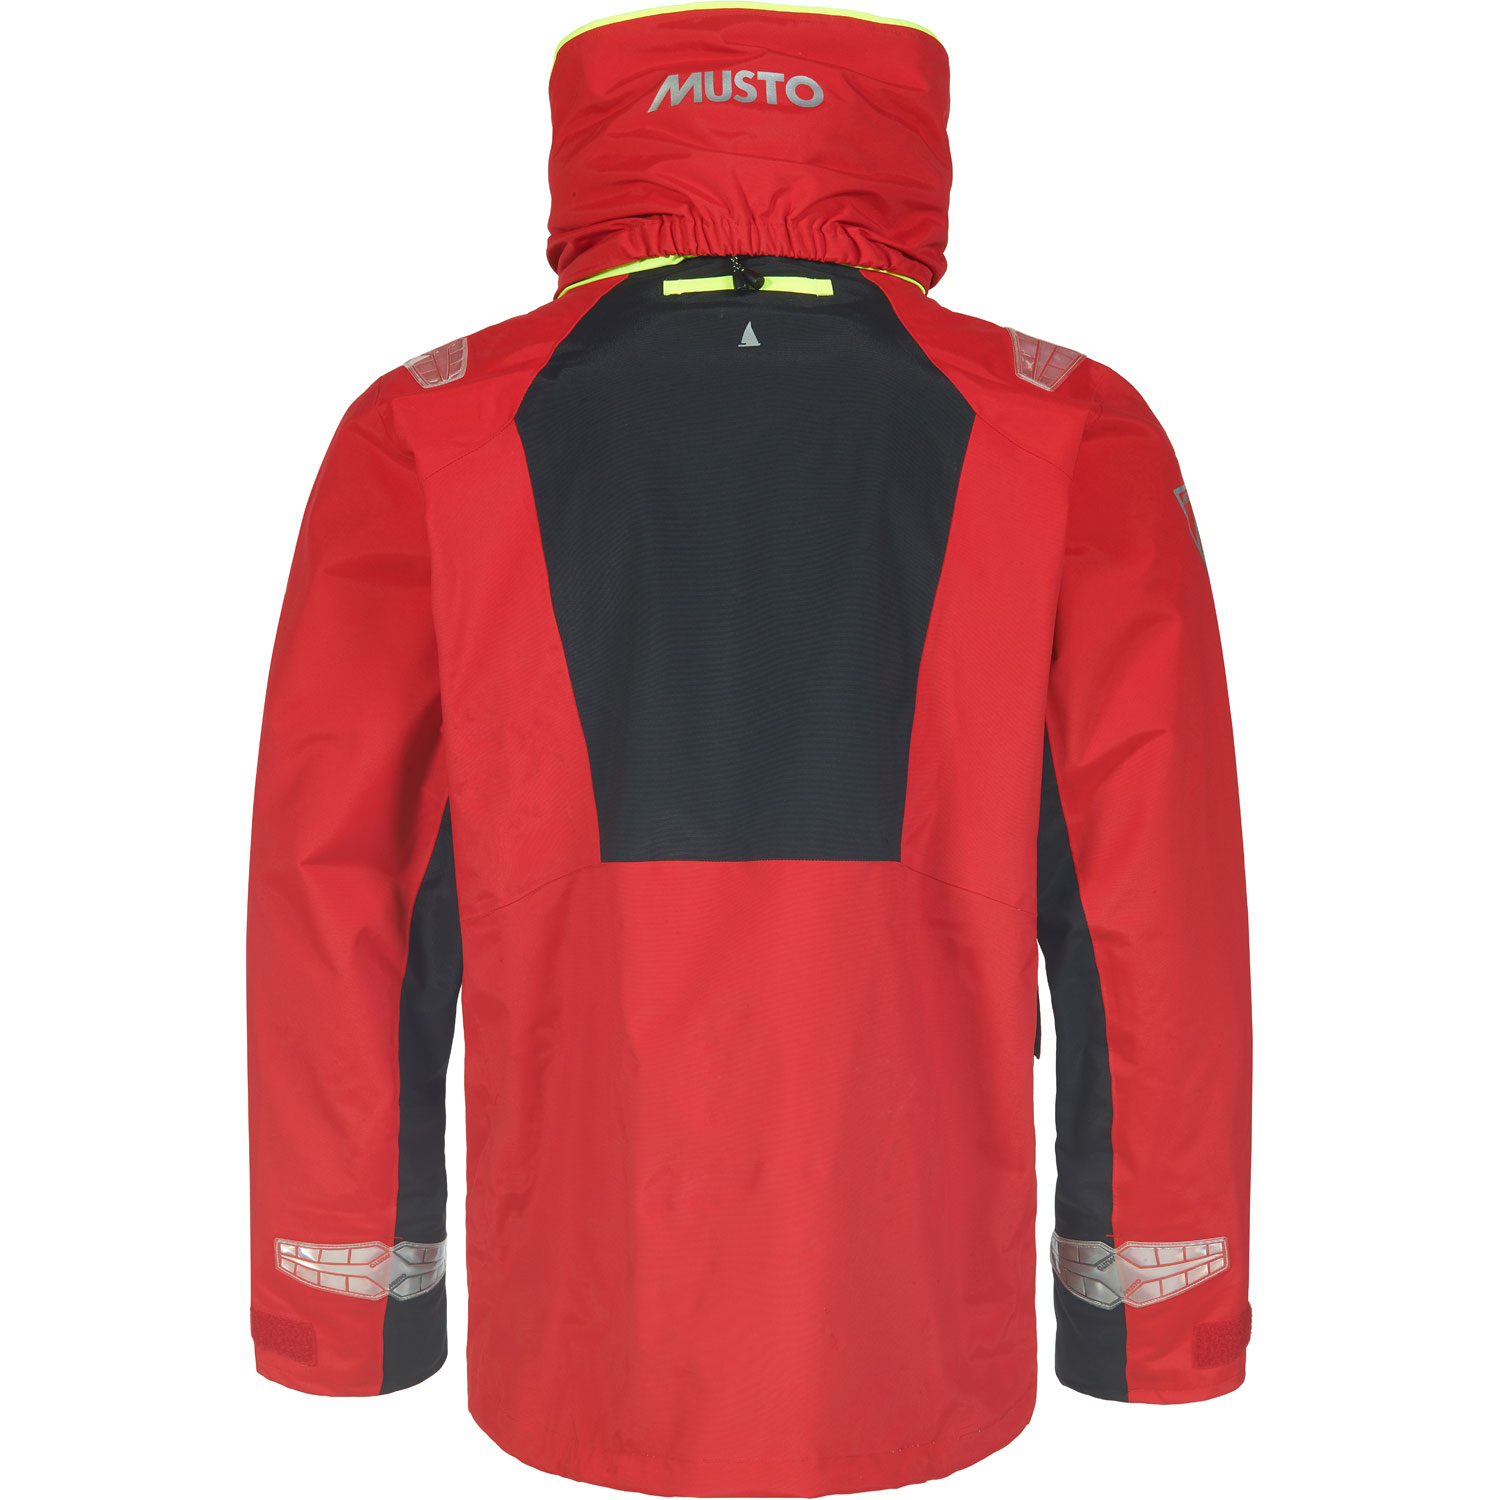 Musto BR2 Offshore Jacket 2022 - True Red 82084 | Coast Water Sports ...